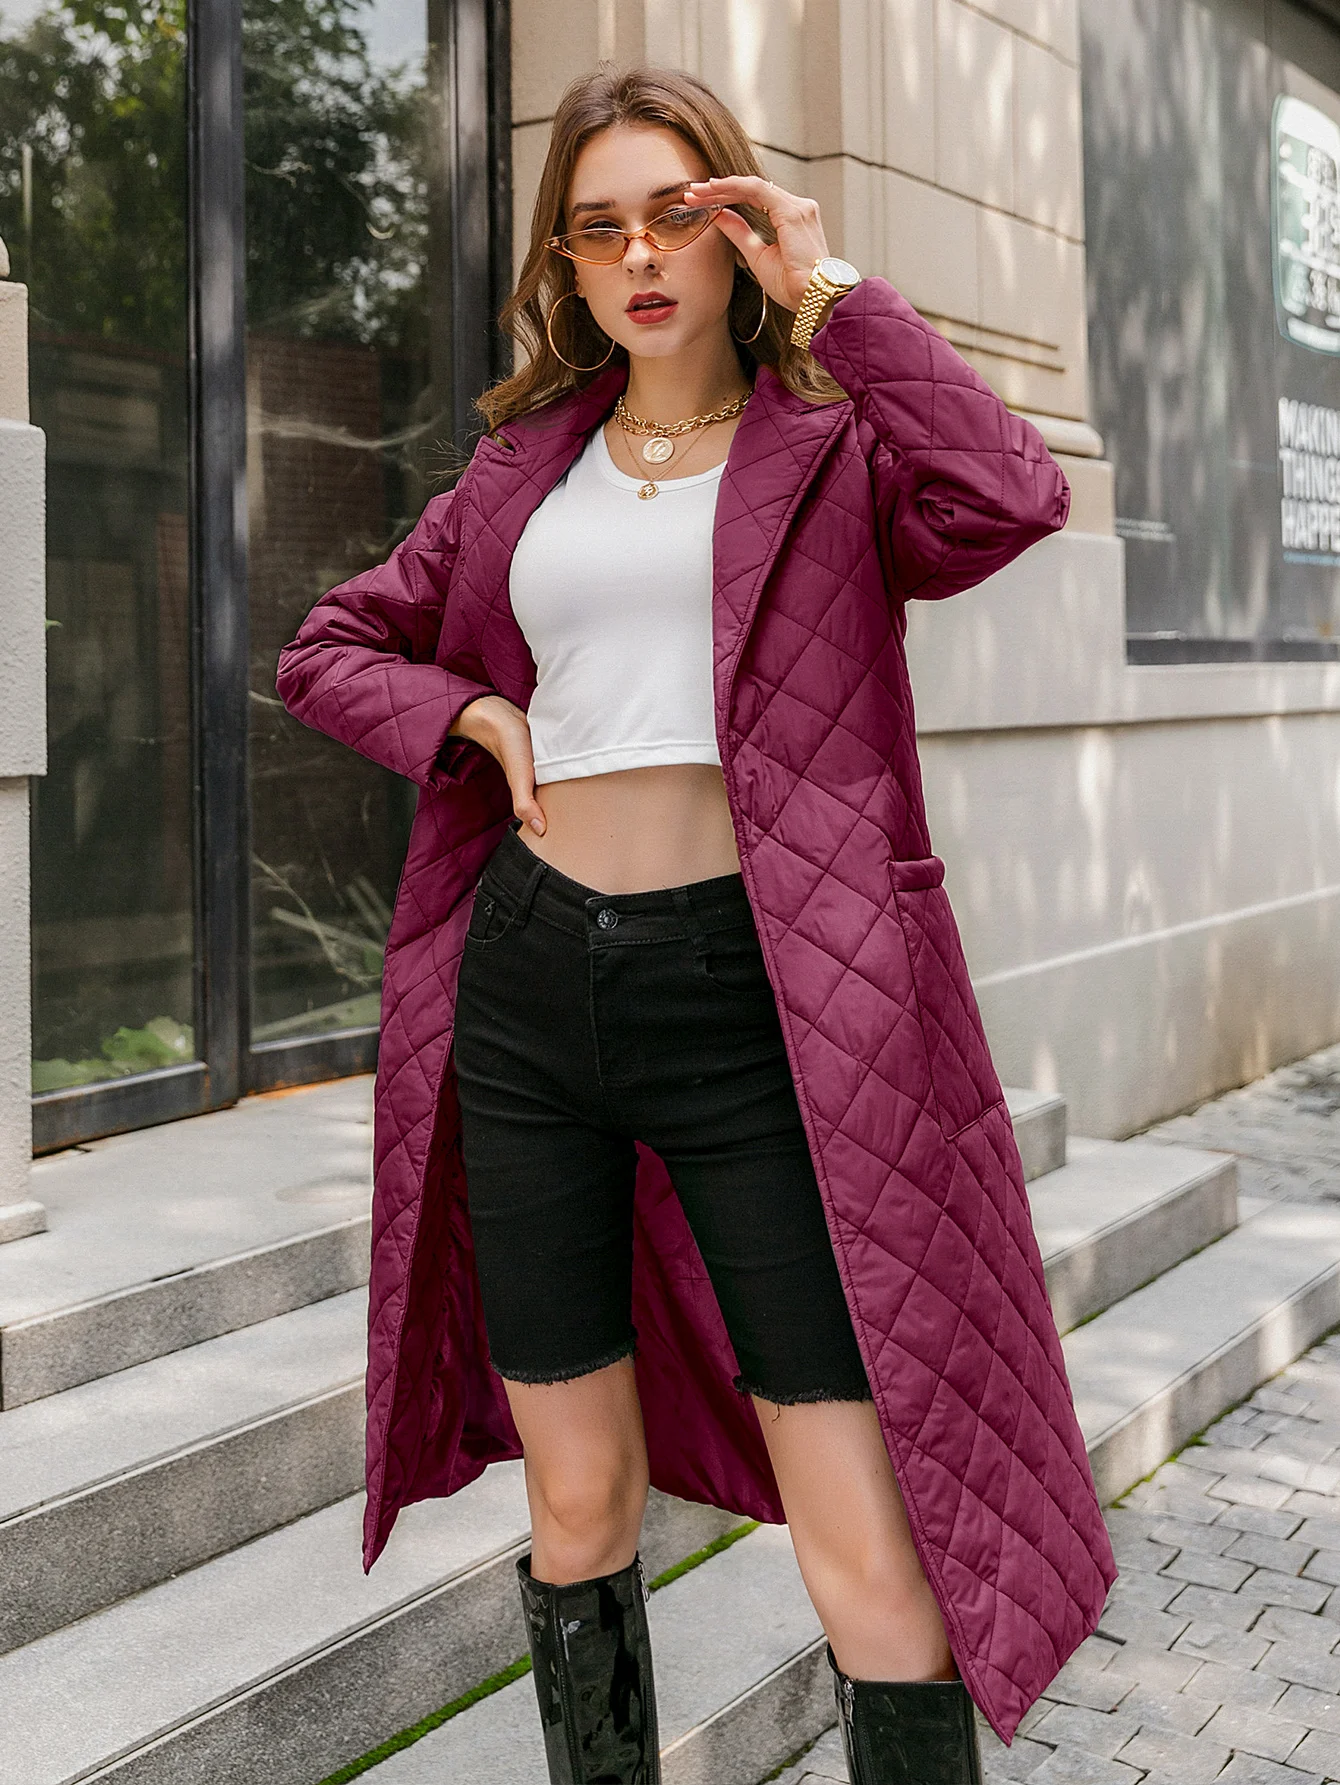 Simplee Long straight winter coat with rhombus pattern Casual sashes women parkas Deep pockets tailored collar stylish outerwear 6